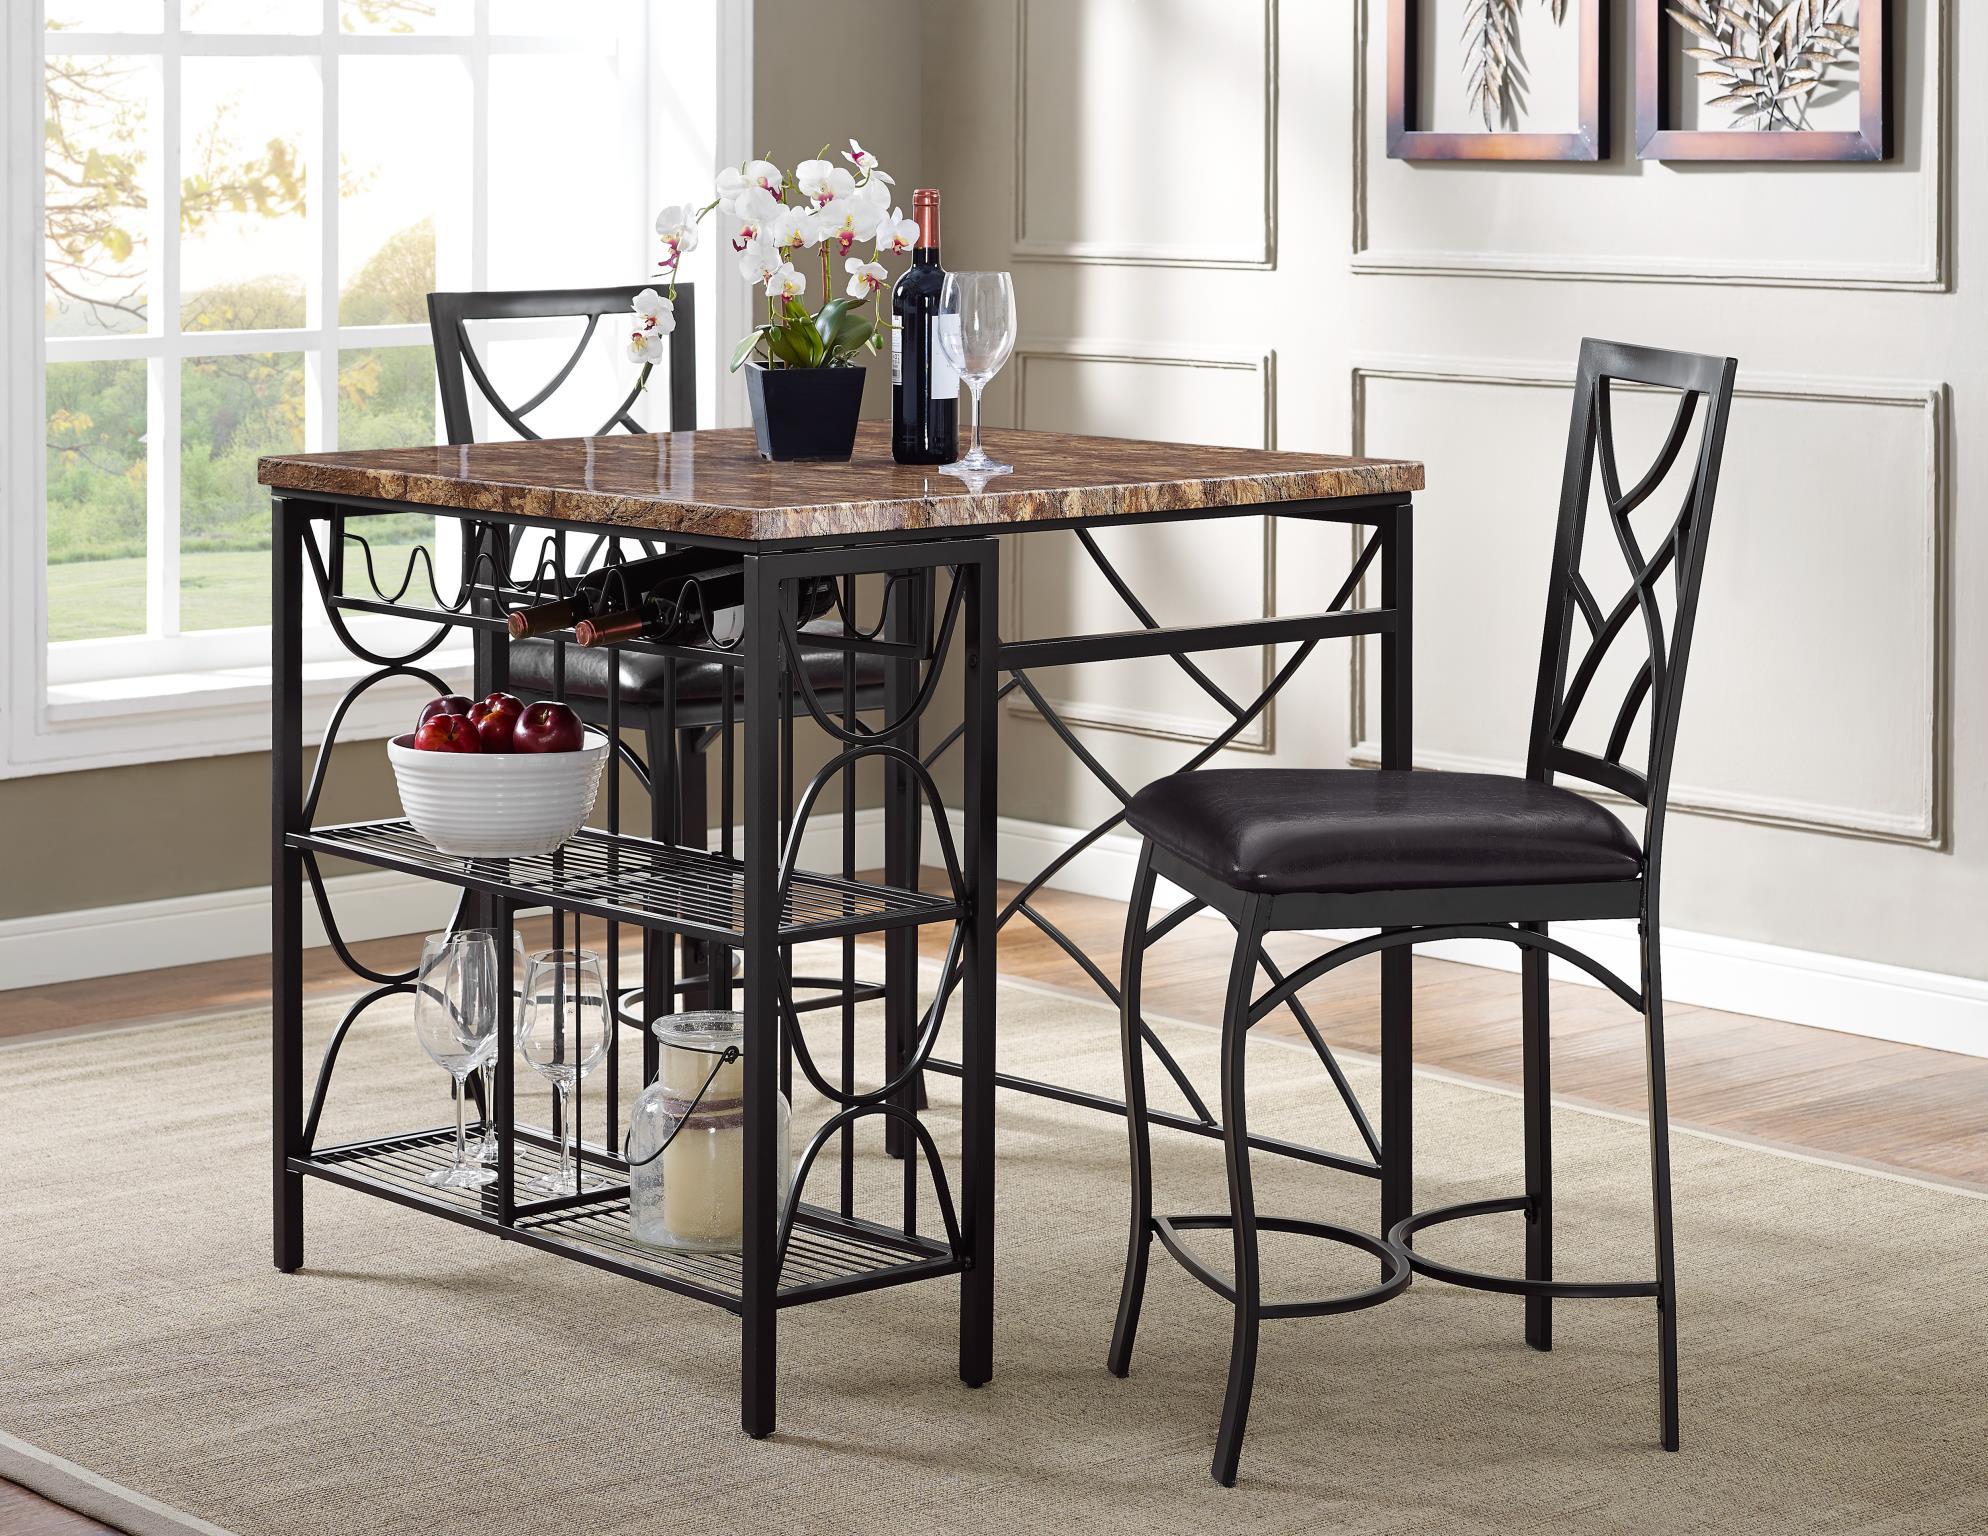 Contemporary, Casual Counter Height Dining Set AYDEN 4402 4402 in Desert sand, Black 